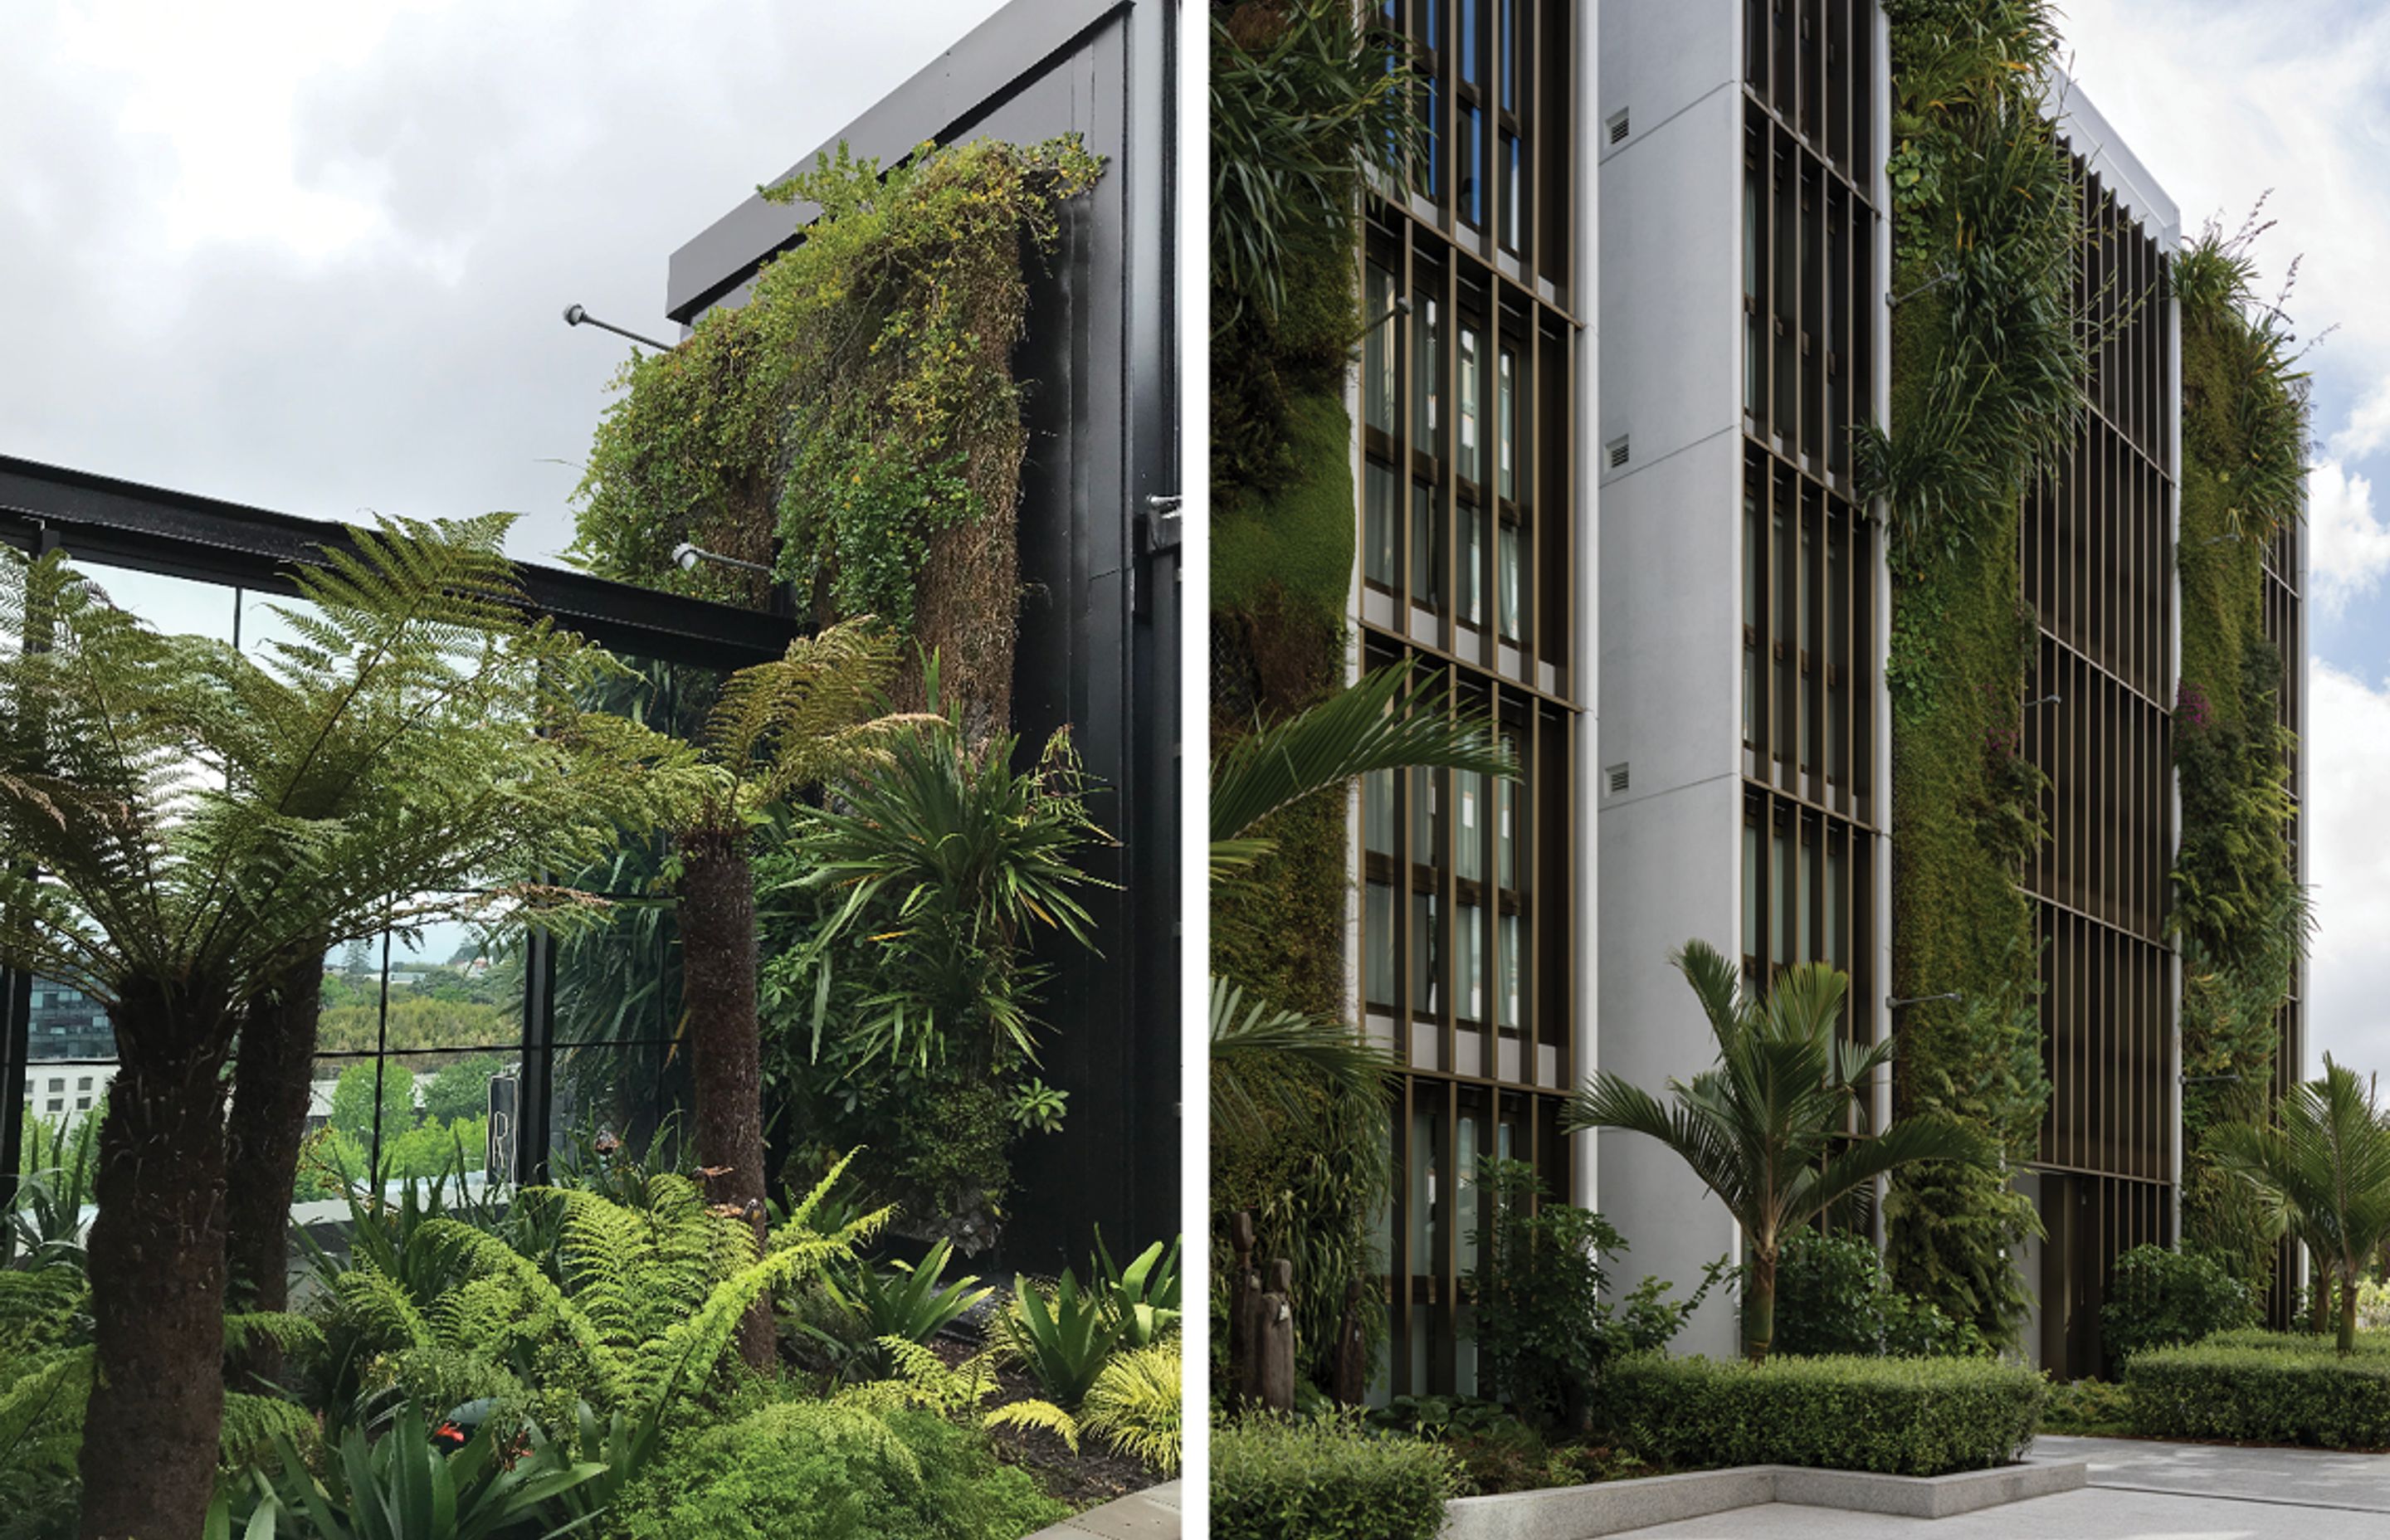 The Westfield Newmarket project (left) included 750sqm of green walls and a rooftop garden. For St Marks Apartments (right) Natural Habitats installed 110sqm of green walls, consisting of predominantly native plants, spread between three, five-storey-high